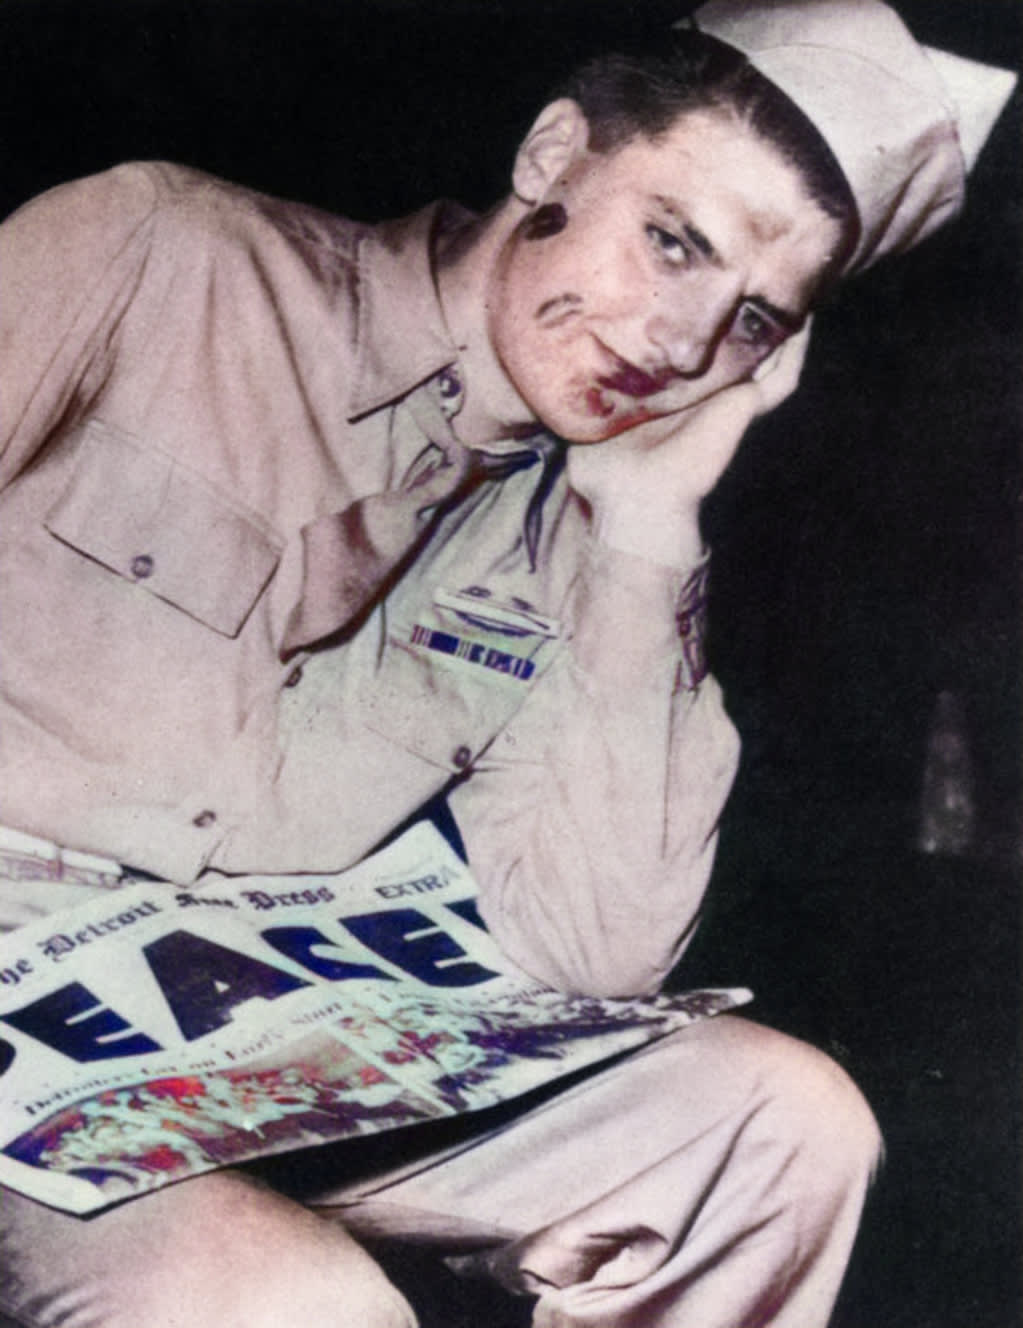 An American soldier with lipstick on his face in Detroit, Michigan during Victory Over Japan Day (V-J Day) celebrations 75 years ago today on August 14, 1945